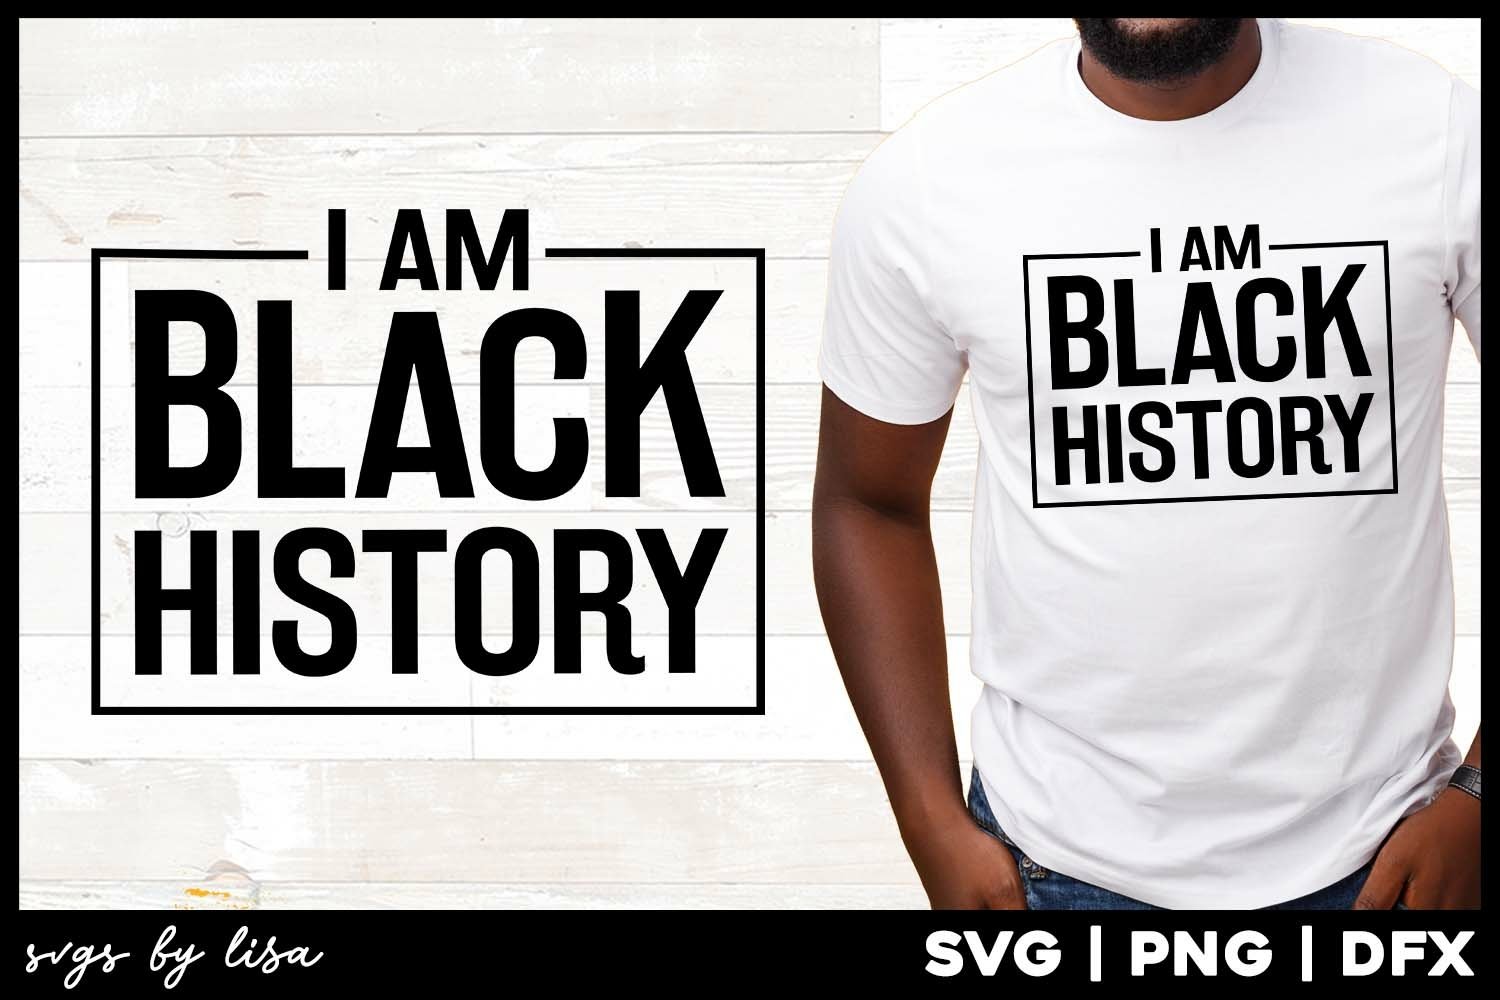 I am black history - quote for t-shirt design.